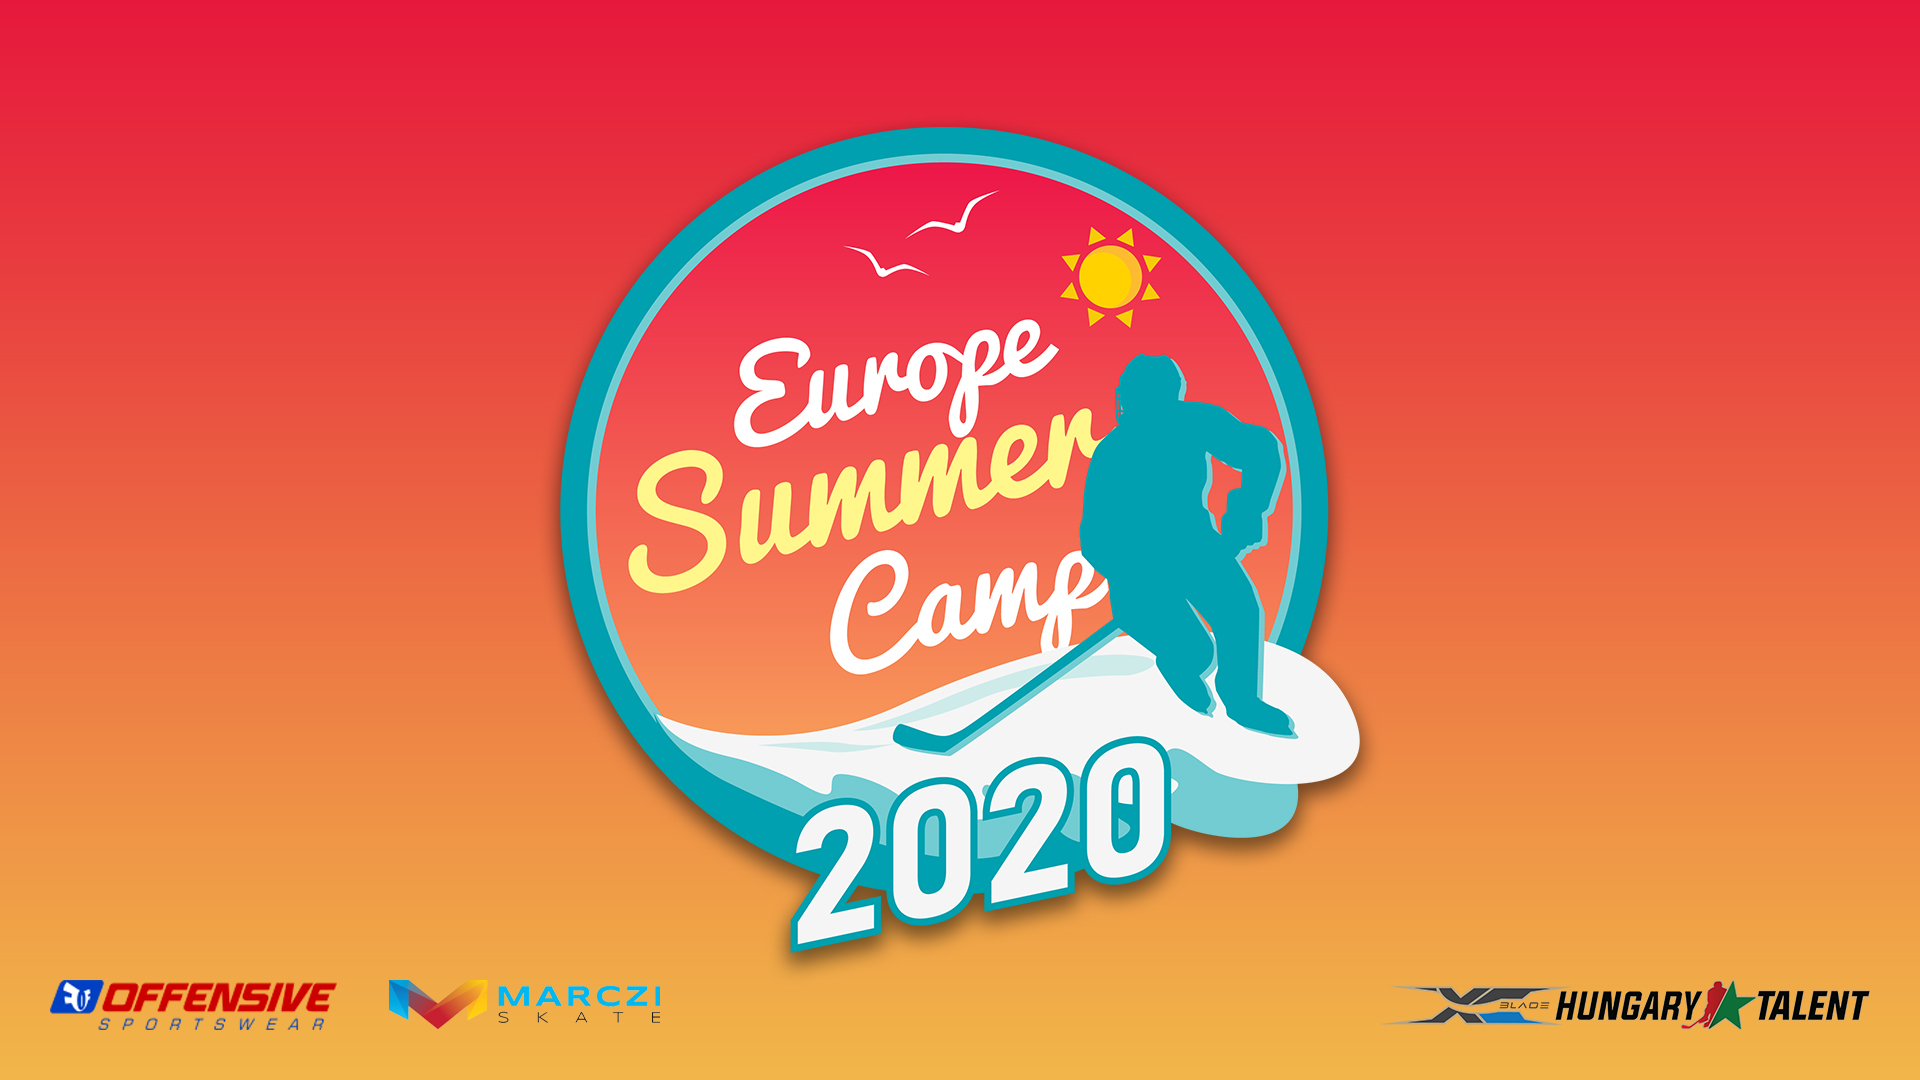 The registration period for the IV. European Summer Camp!